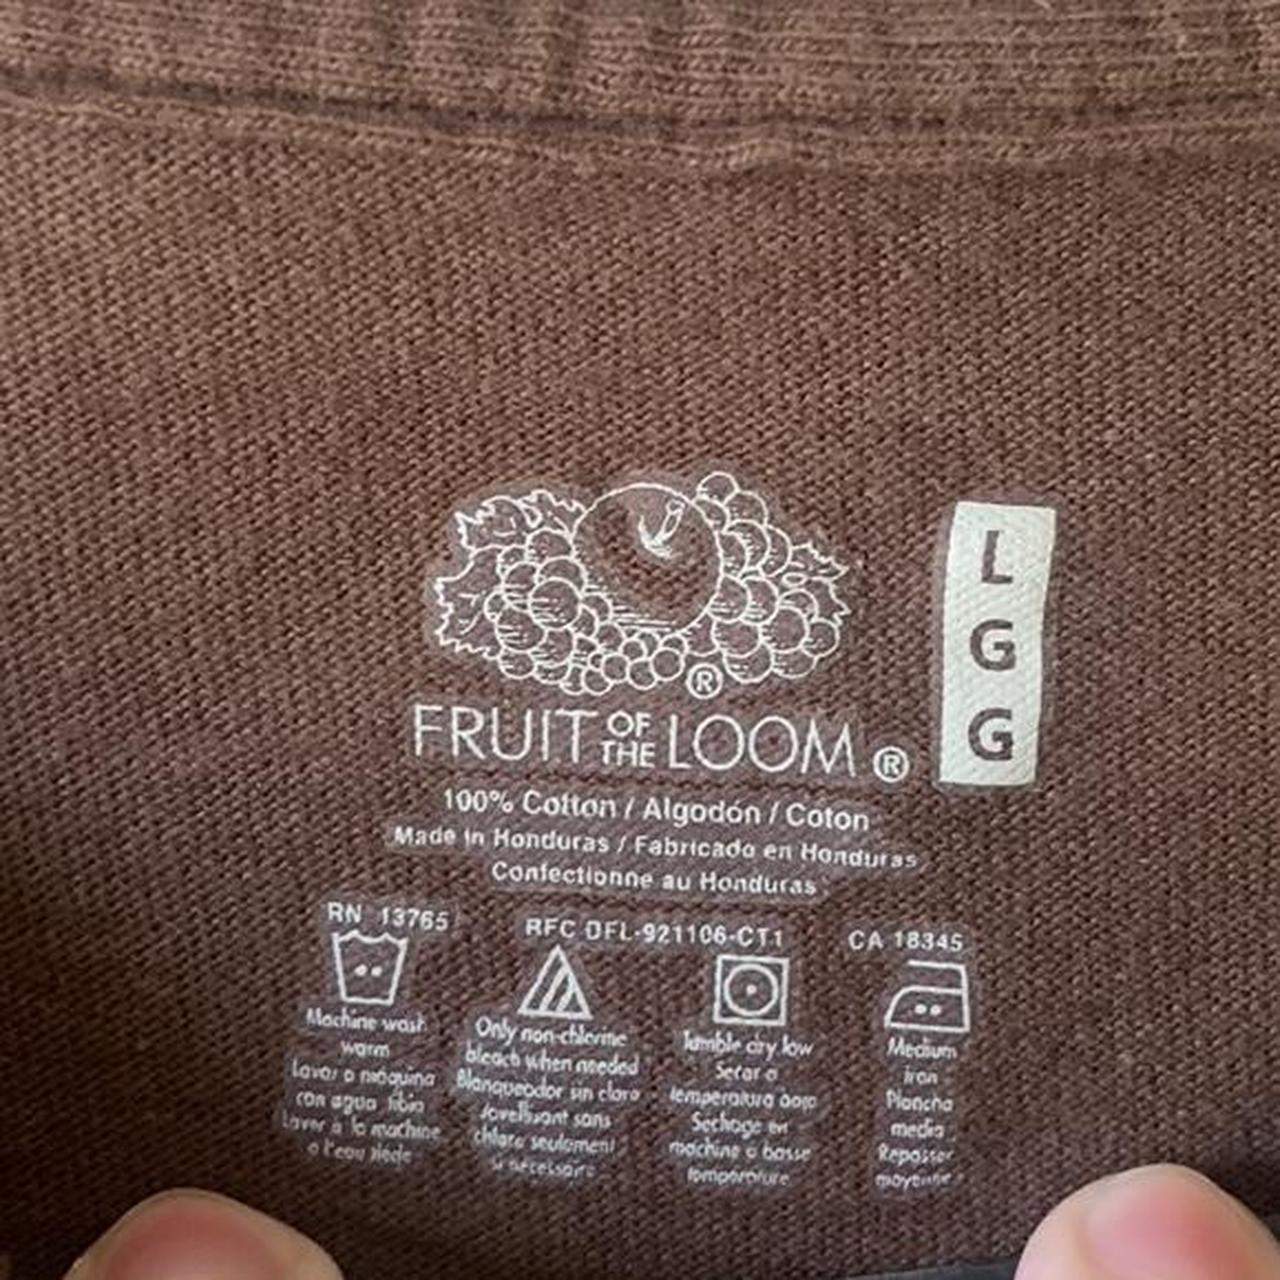 Fruit of the Loom Men's Brown and White T-shirt (3)